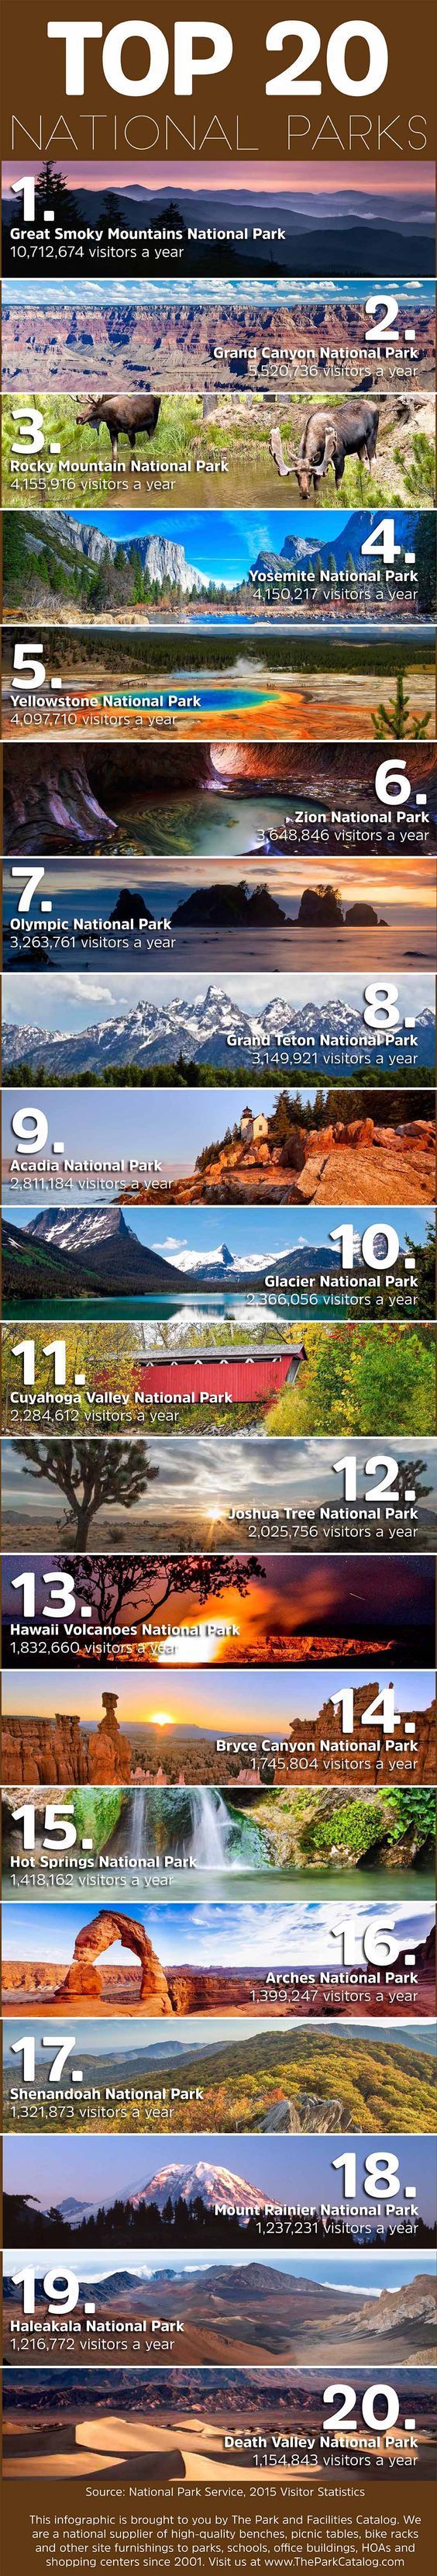 Its National Parks Week, which means you can enter national parks for FREE! G